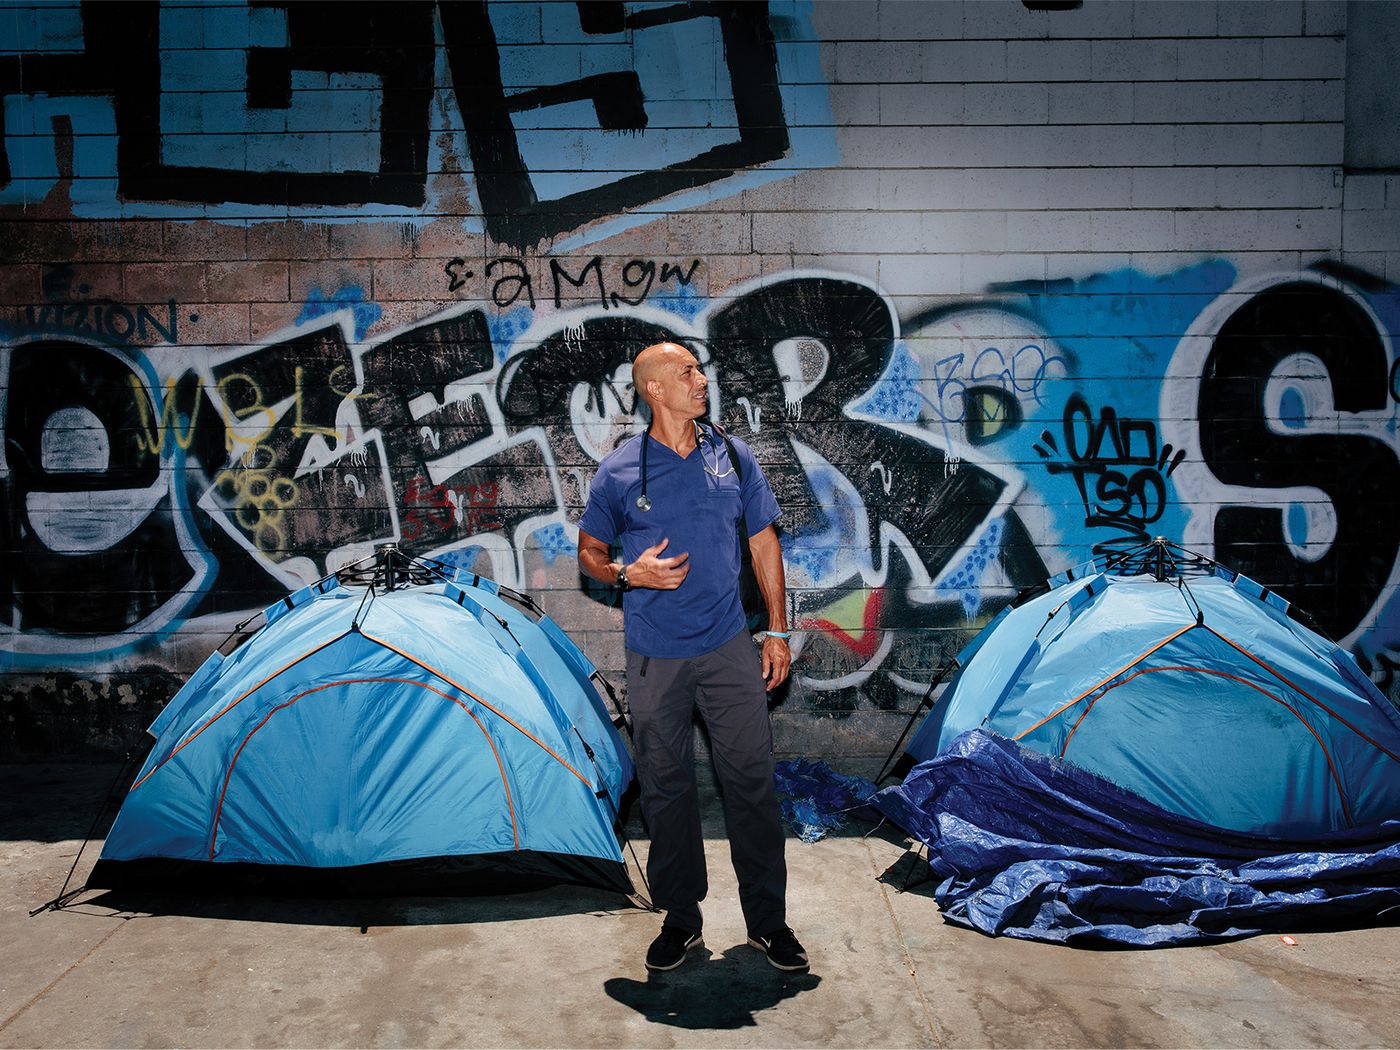 man standing in front of two blue tents and a wall of graffiti